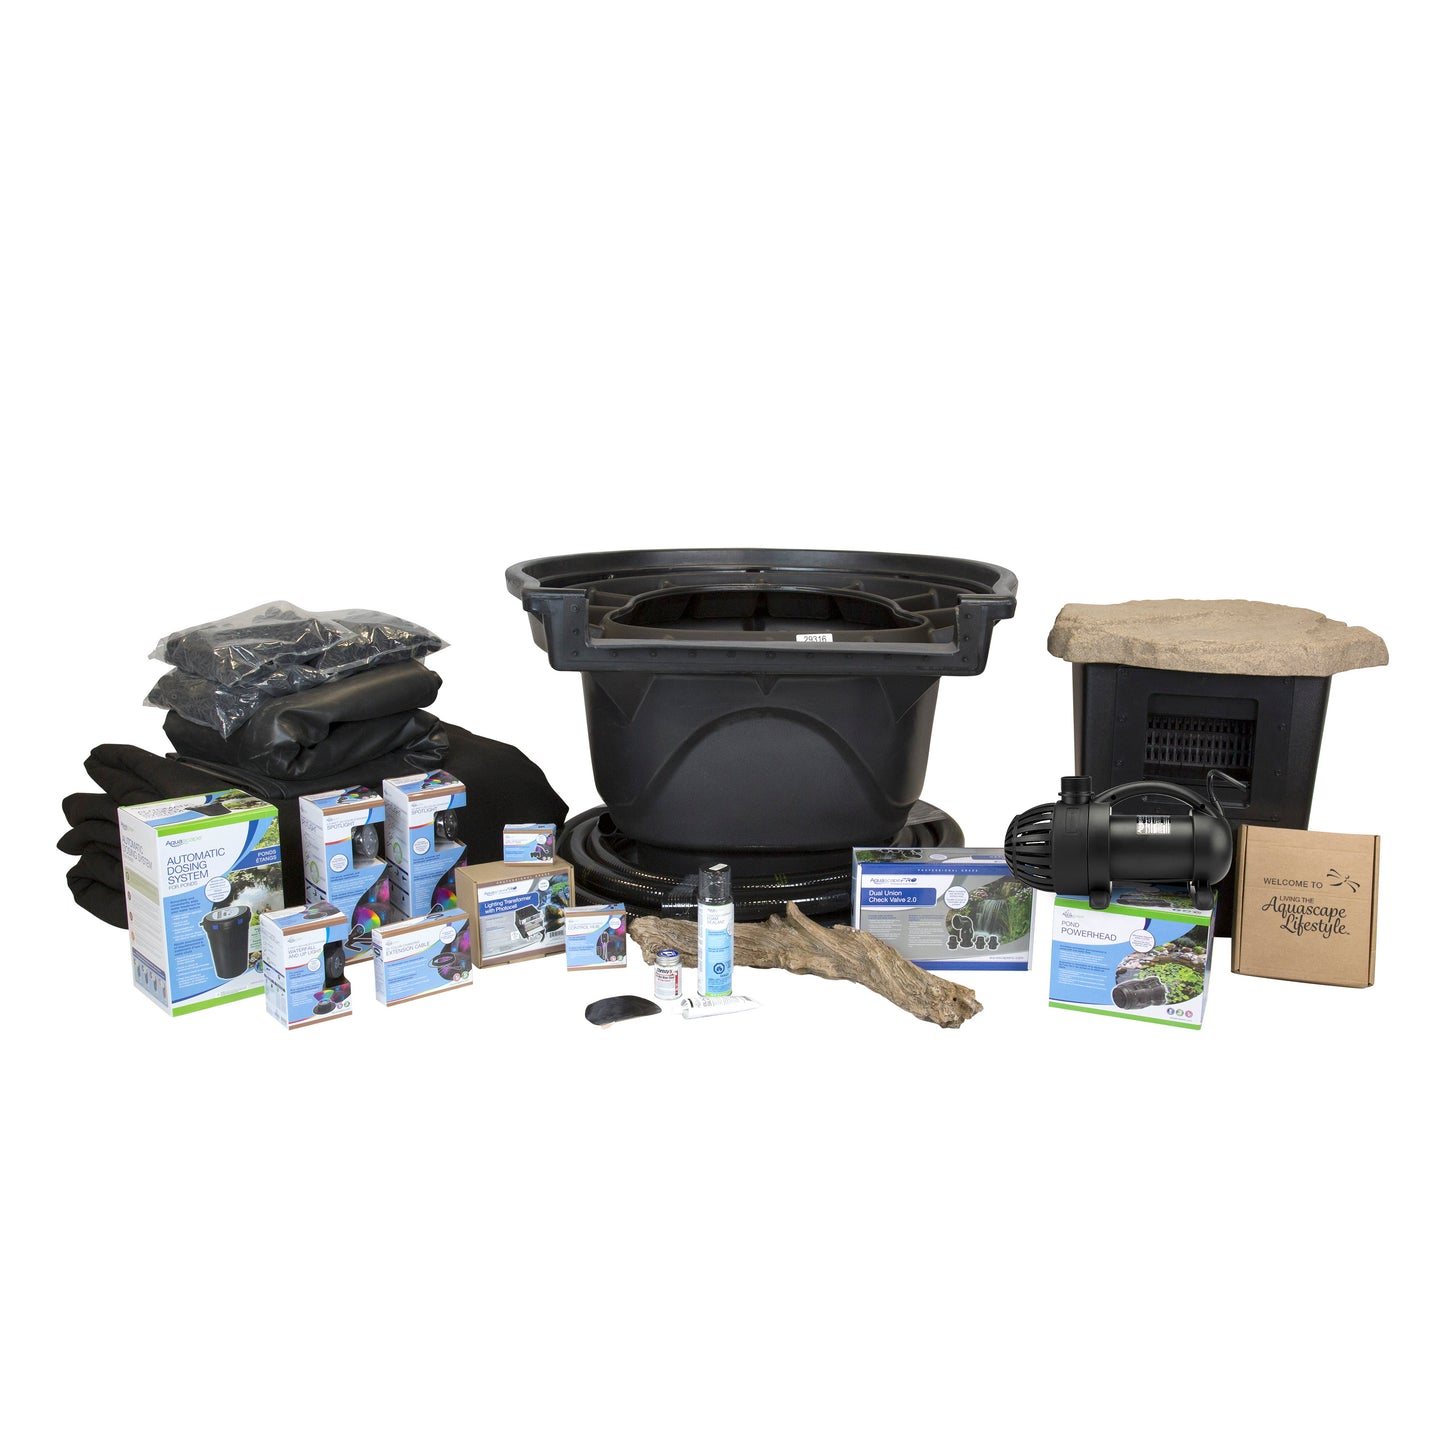 Large Deluxe Pond Kit 21 x 26 with AquaSurge 4000-8000 Adjustable Flow Pond Pump